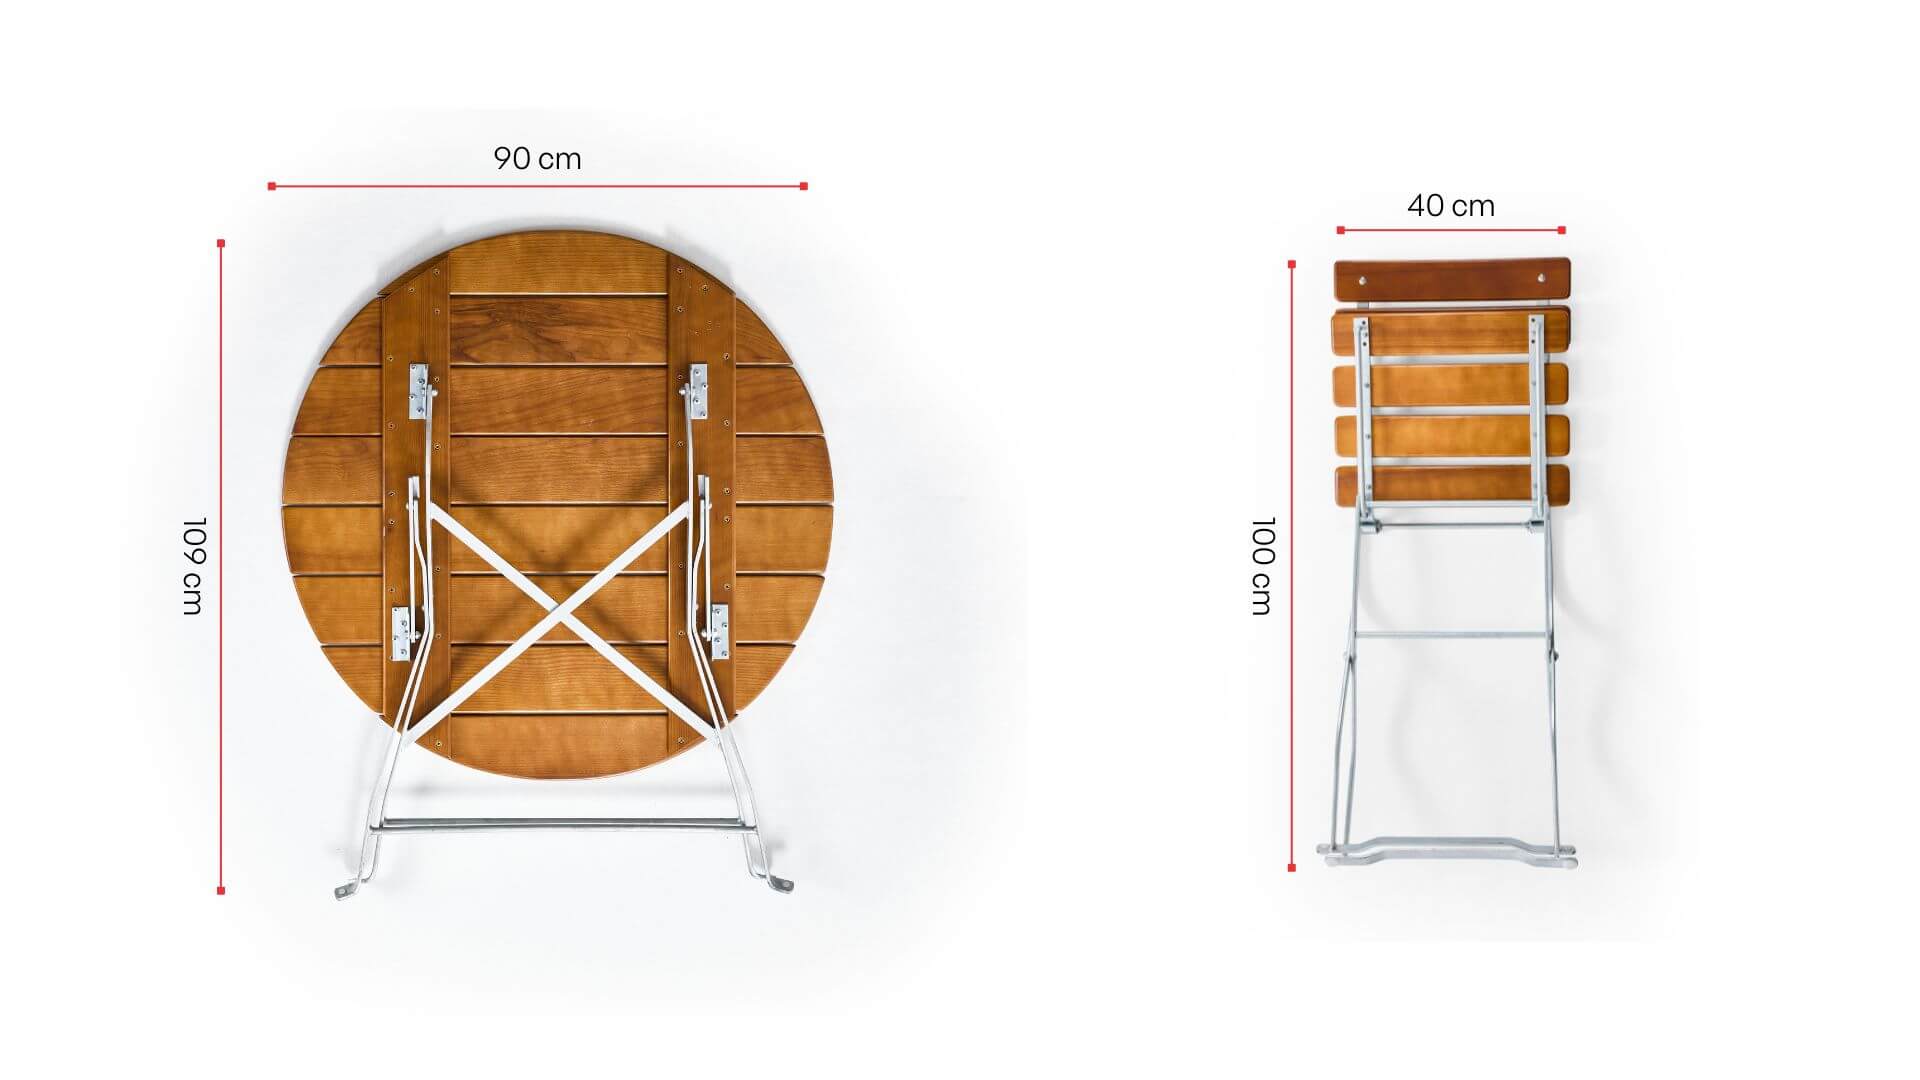 The folded dimensions of the round beer garden table and beer garden chair are shown.